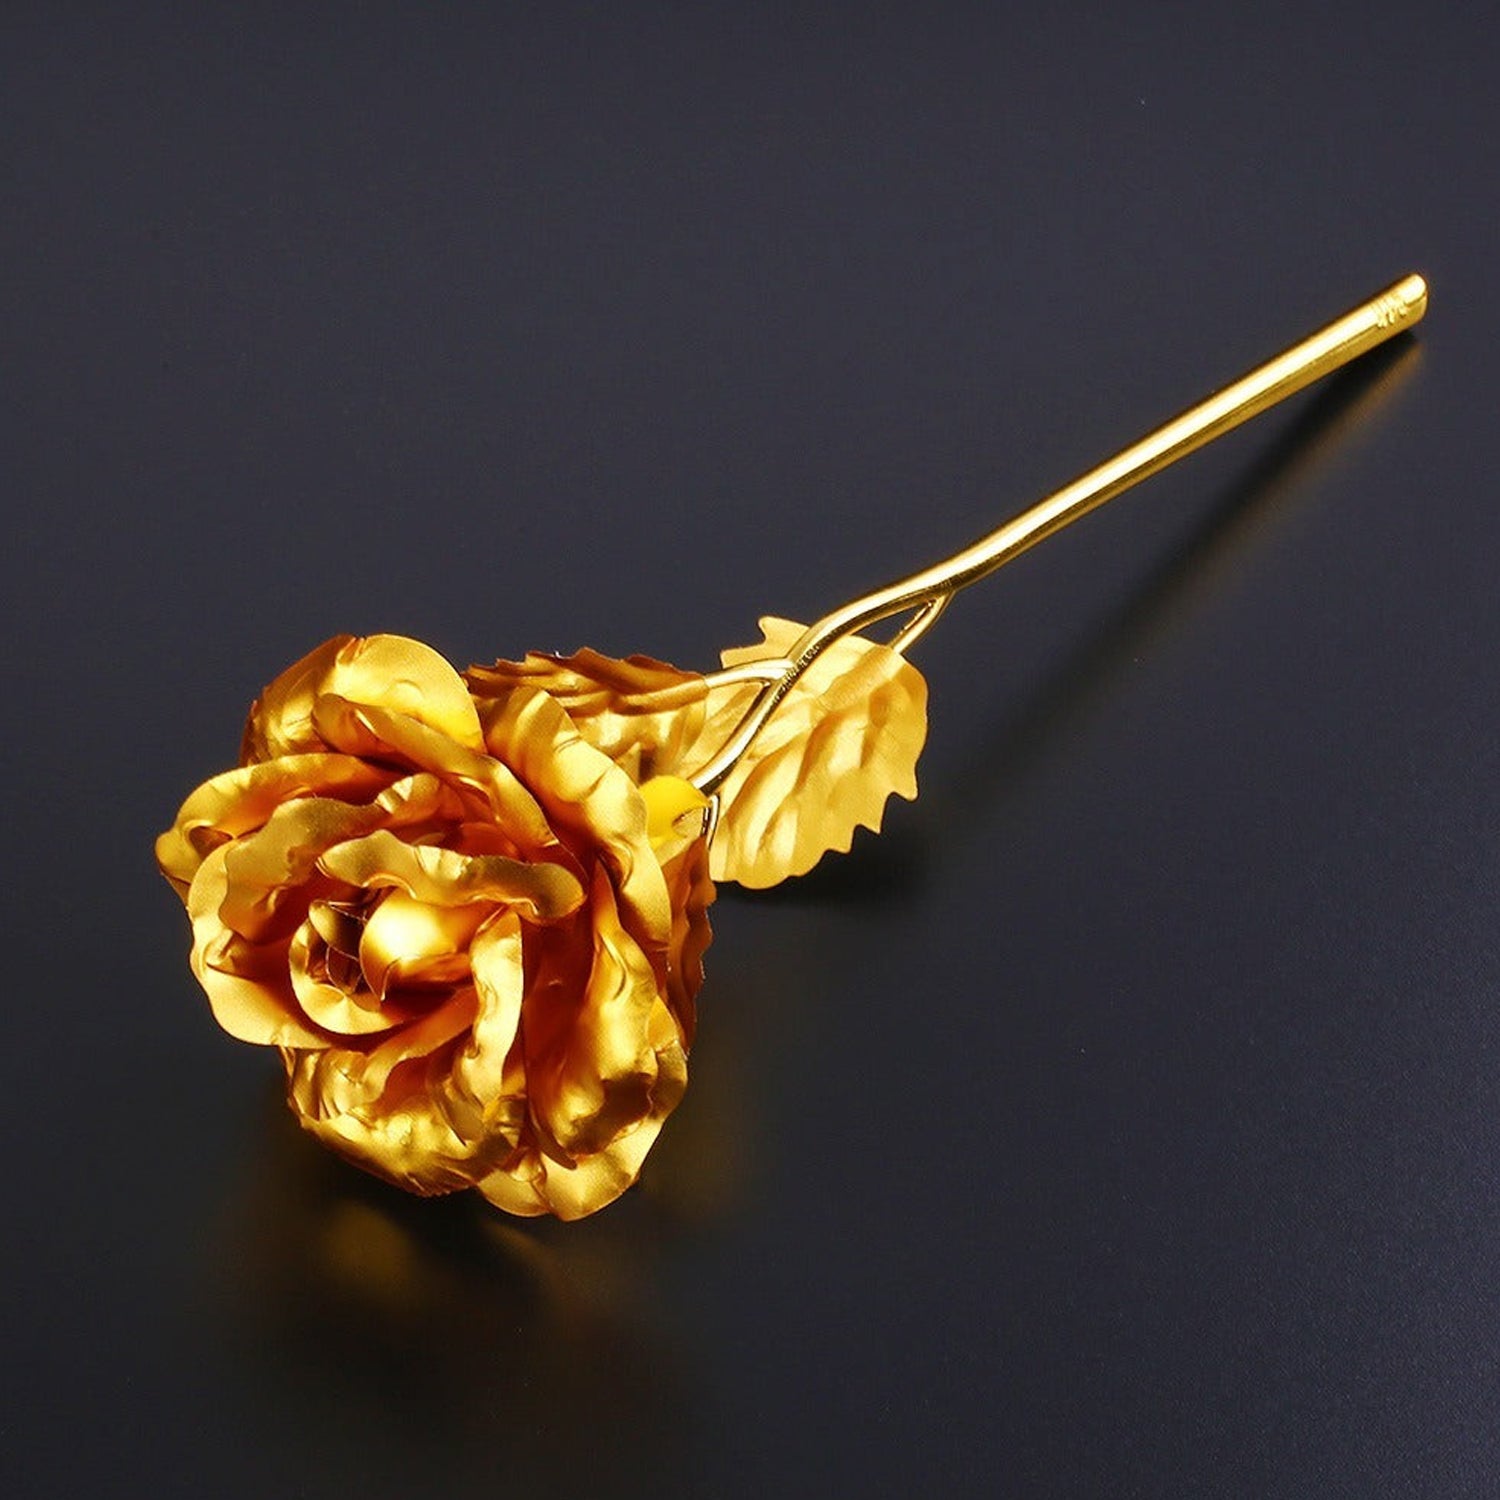 0879 B Golden Rose used in all kinds of places like household, offices, cafe's, etc. for decorating and to look good purposes and all. 